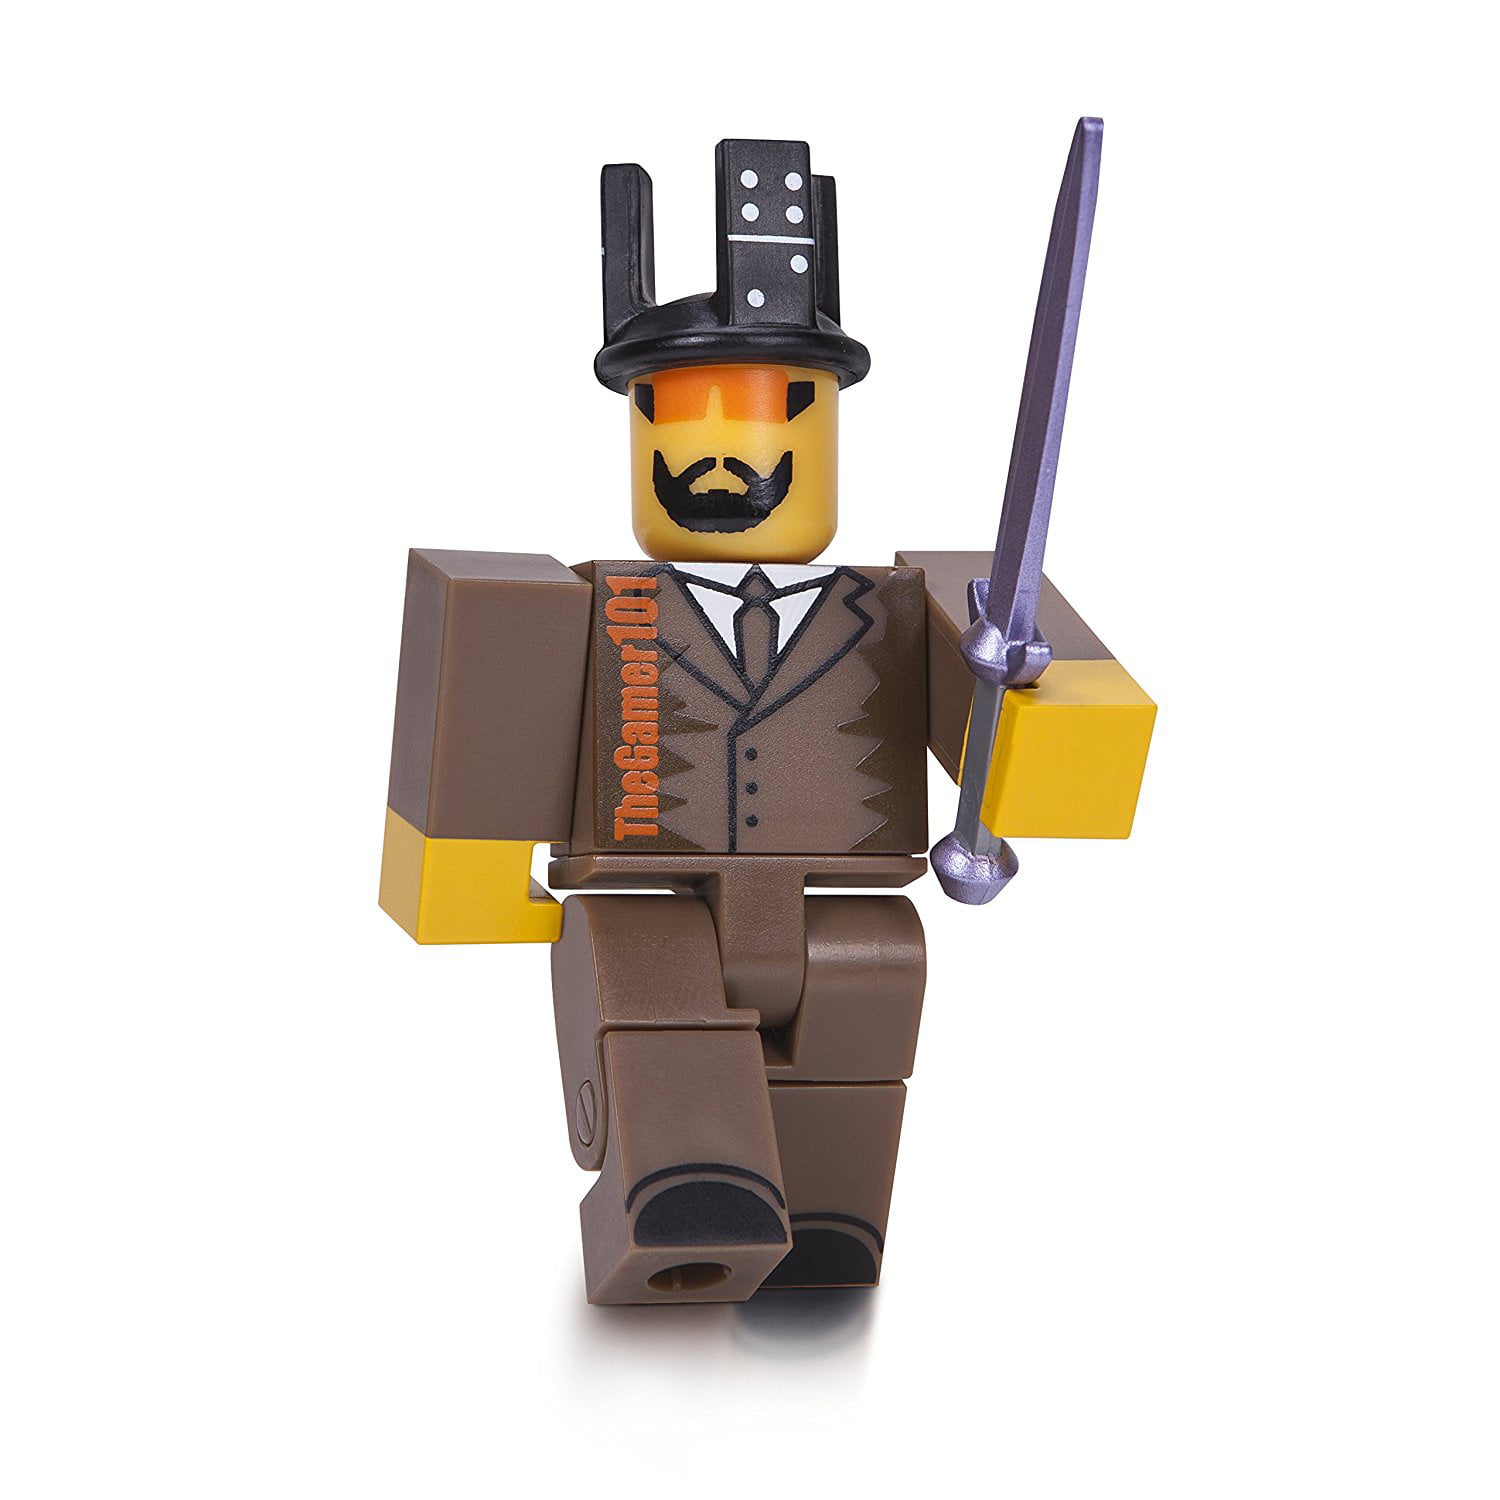 Roblox Action Collection Legends Of Roblox Six Figure Pack Includes Exclusive Virtual Item Walmart Com Walmart Com - details about legends of roblox action figure 6 pack